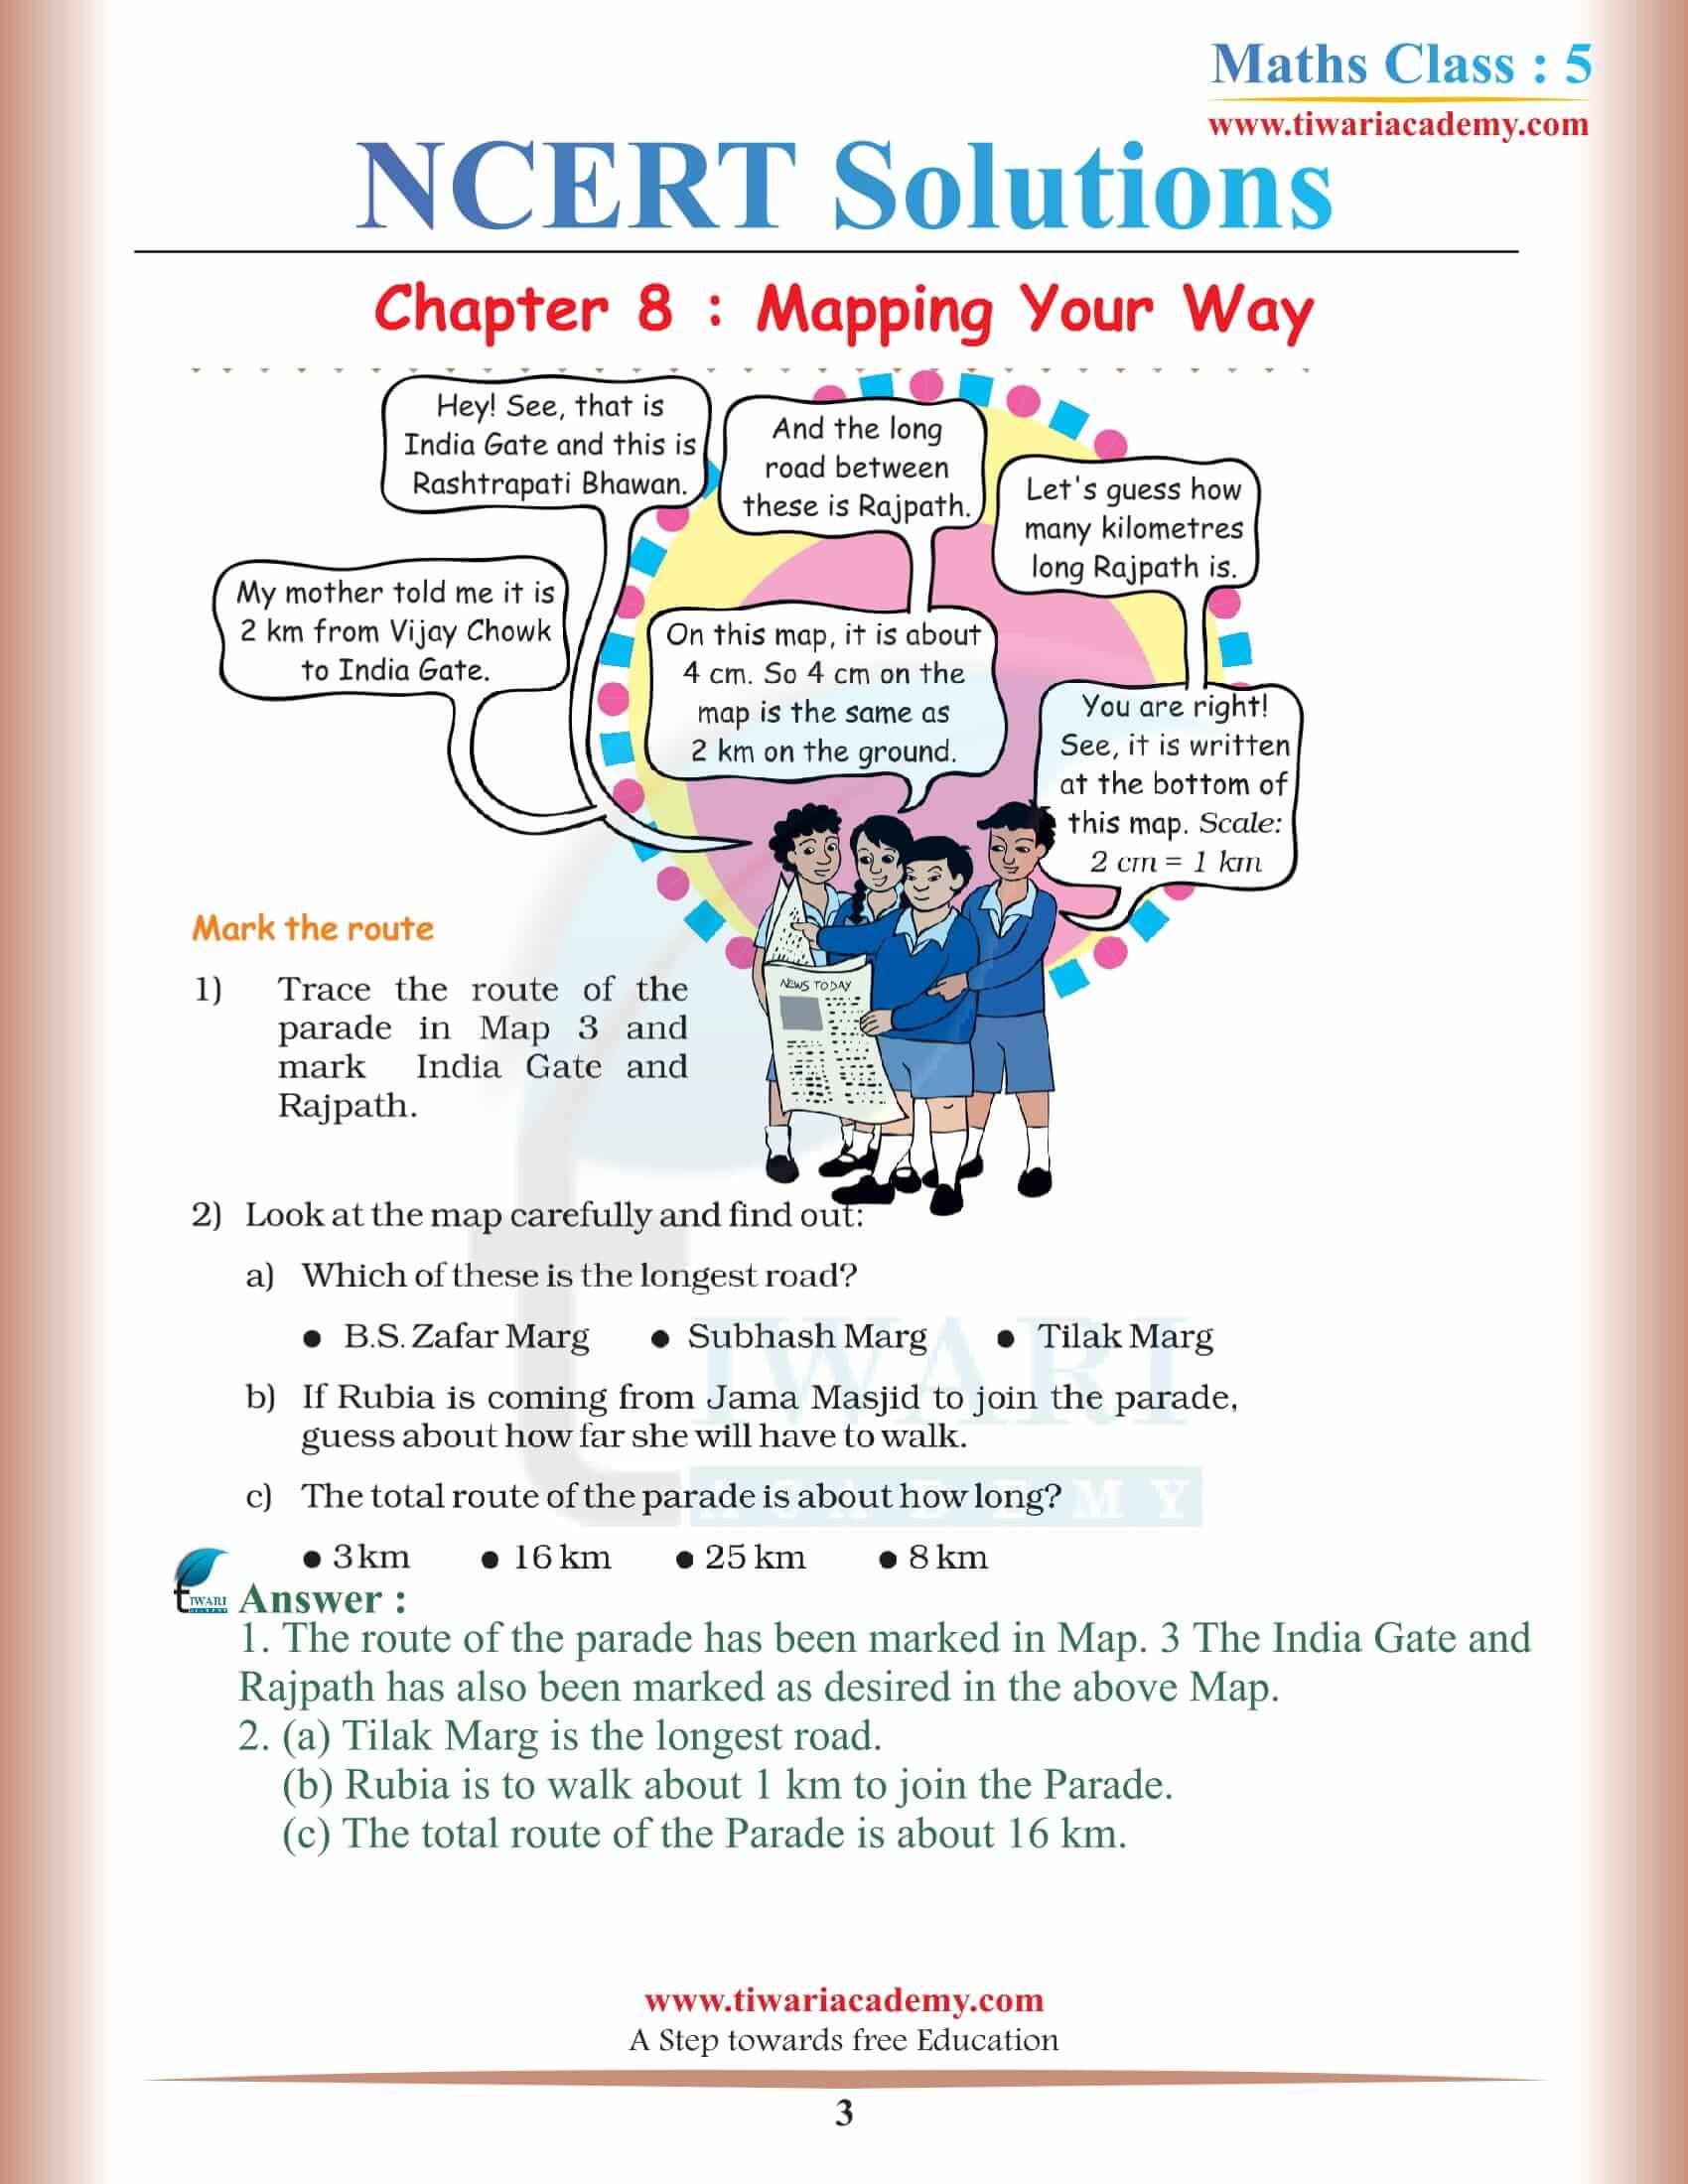 NCERT Solutions for Class 5 Maths Chapter 8 in English Medium